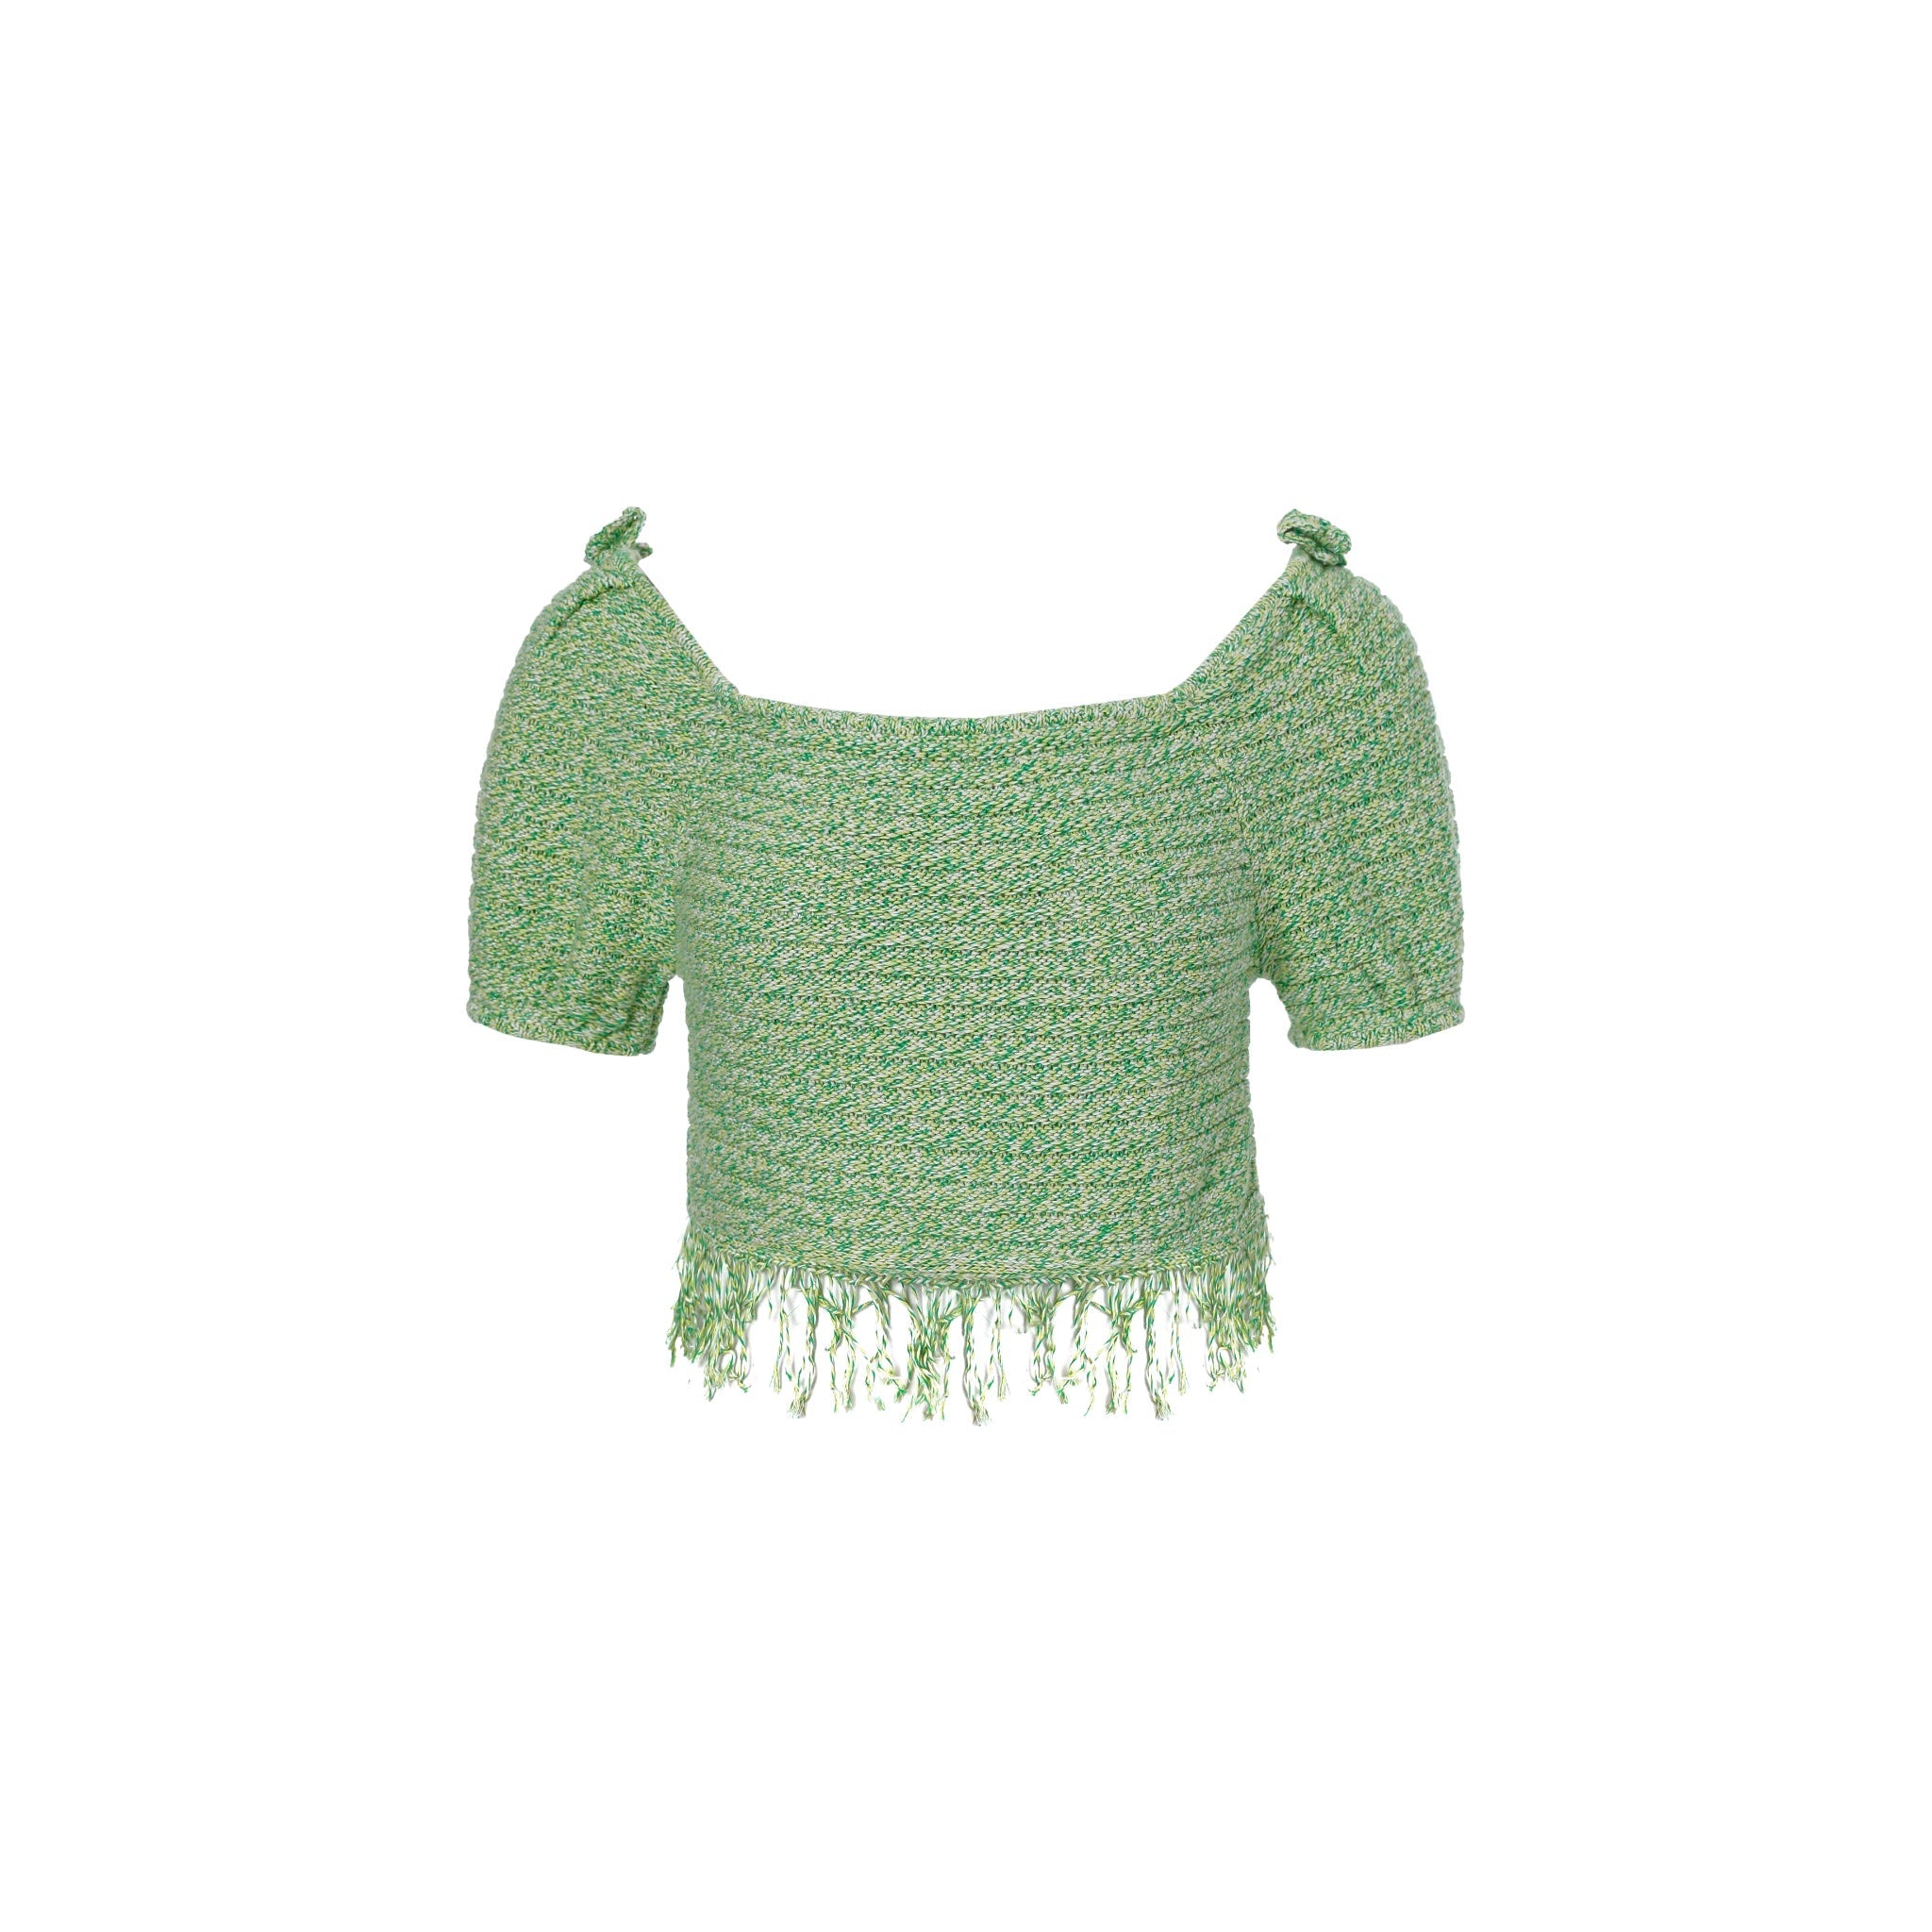 KNIT CLUB 1990™ KAI Green Floral Puff Sleeve Top | MADA IN CHINA